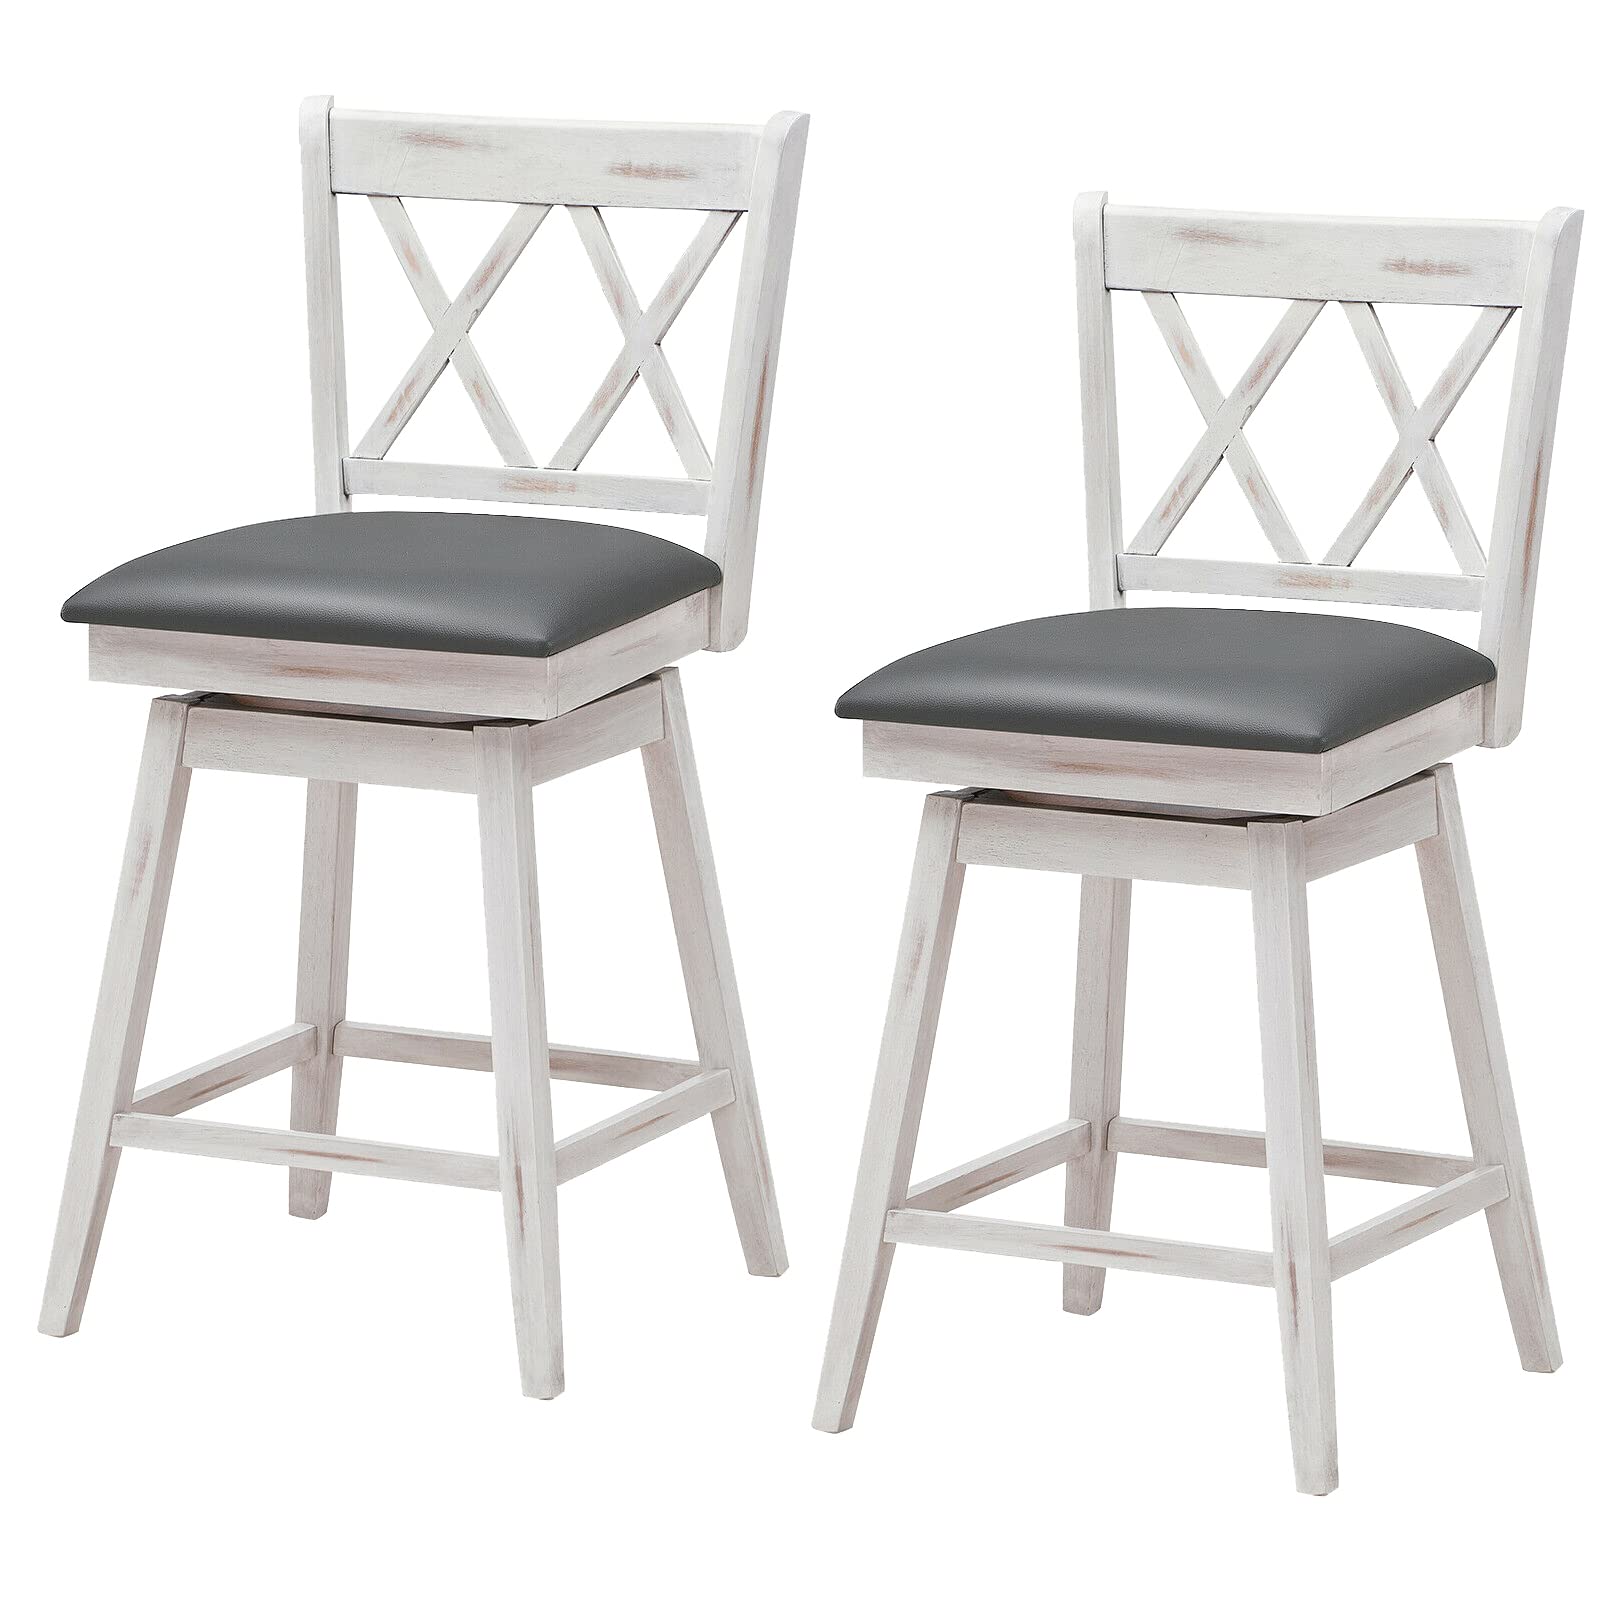 UJOYPAYD Swivel Bar Stool Set of 2, 25 inch Seat Height Bar Chair,Upholstered Cushion 360° Counter Height Bar Stool with Backres